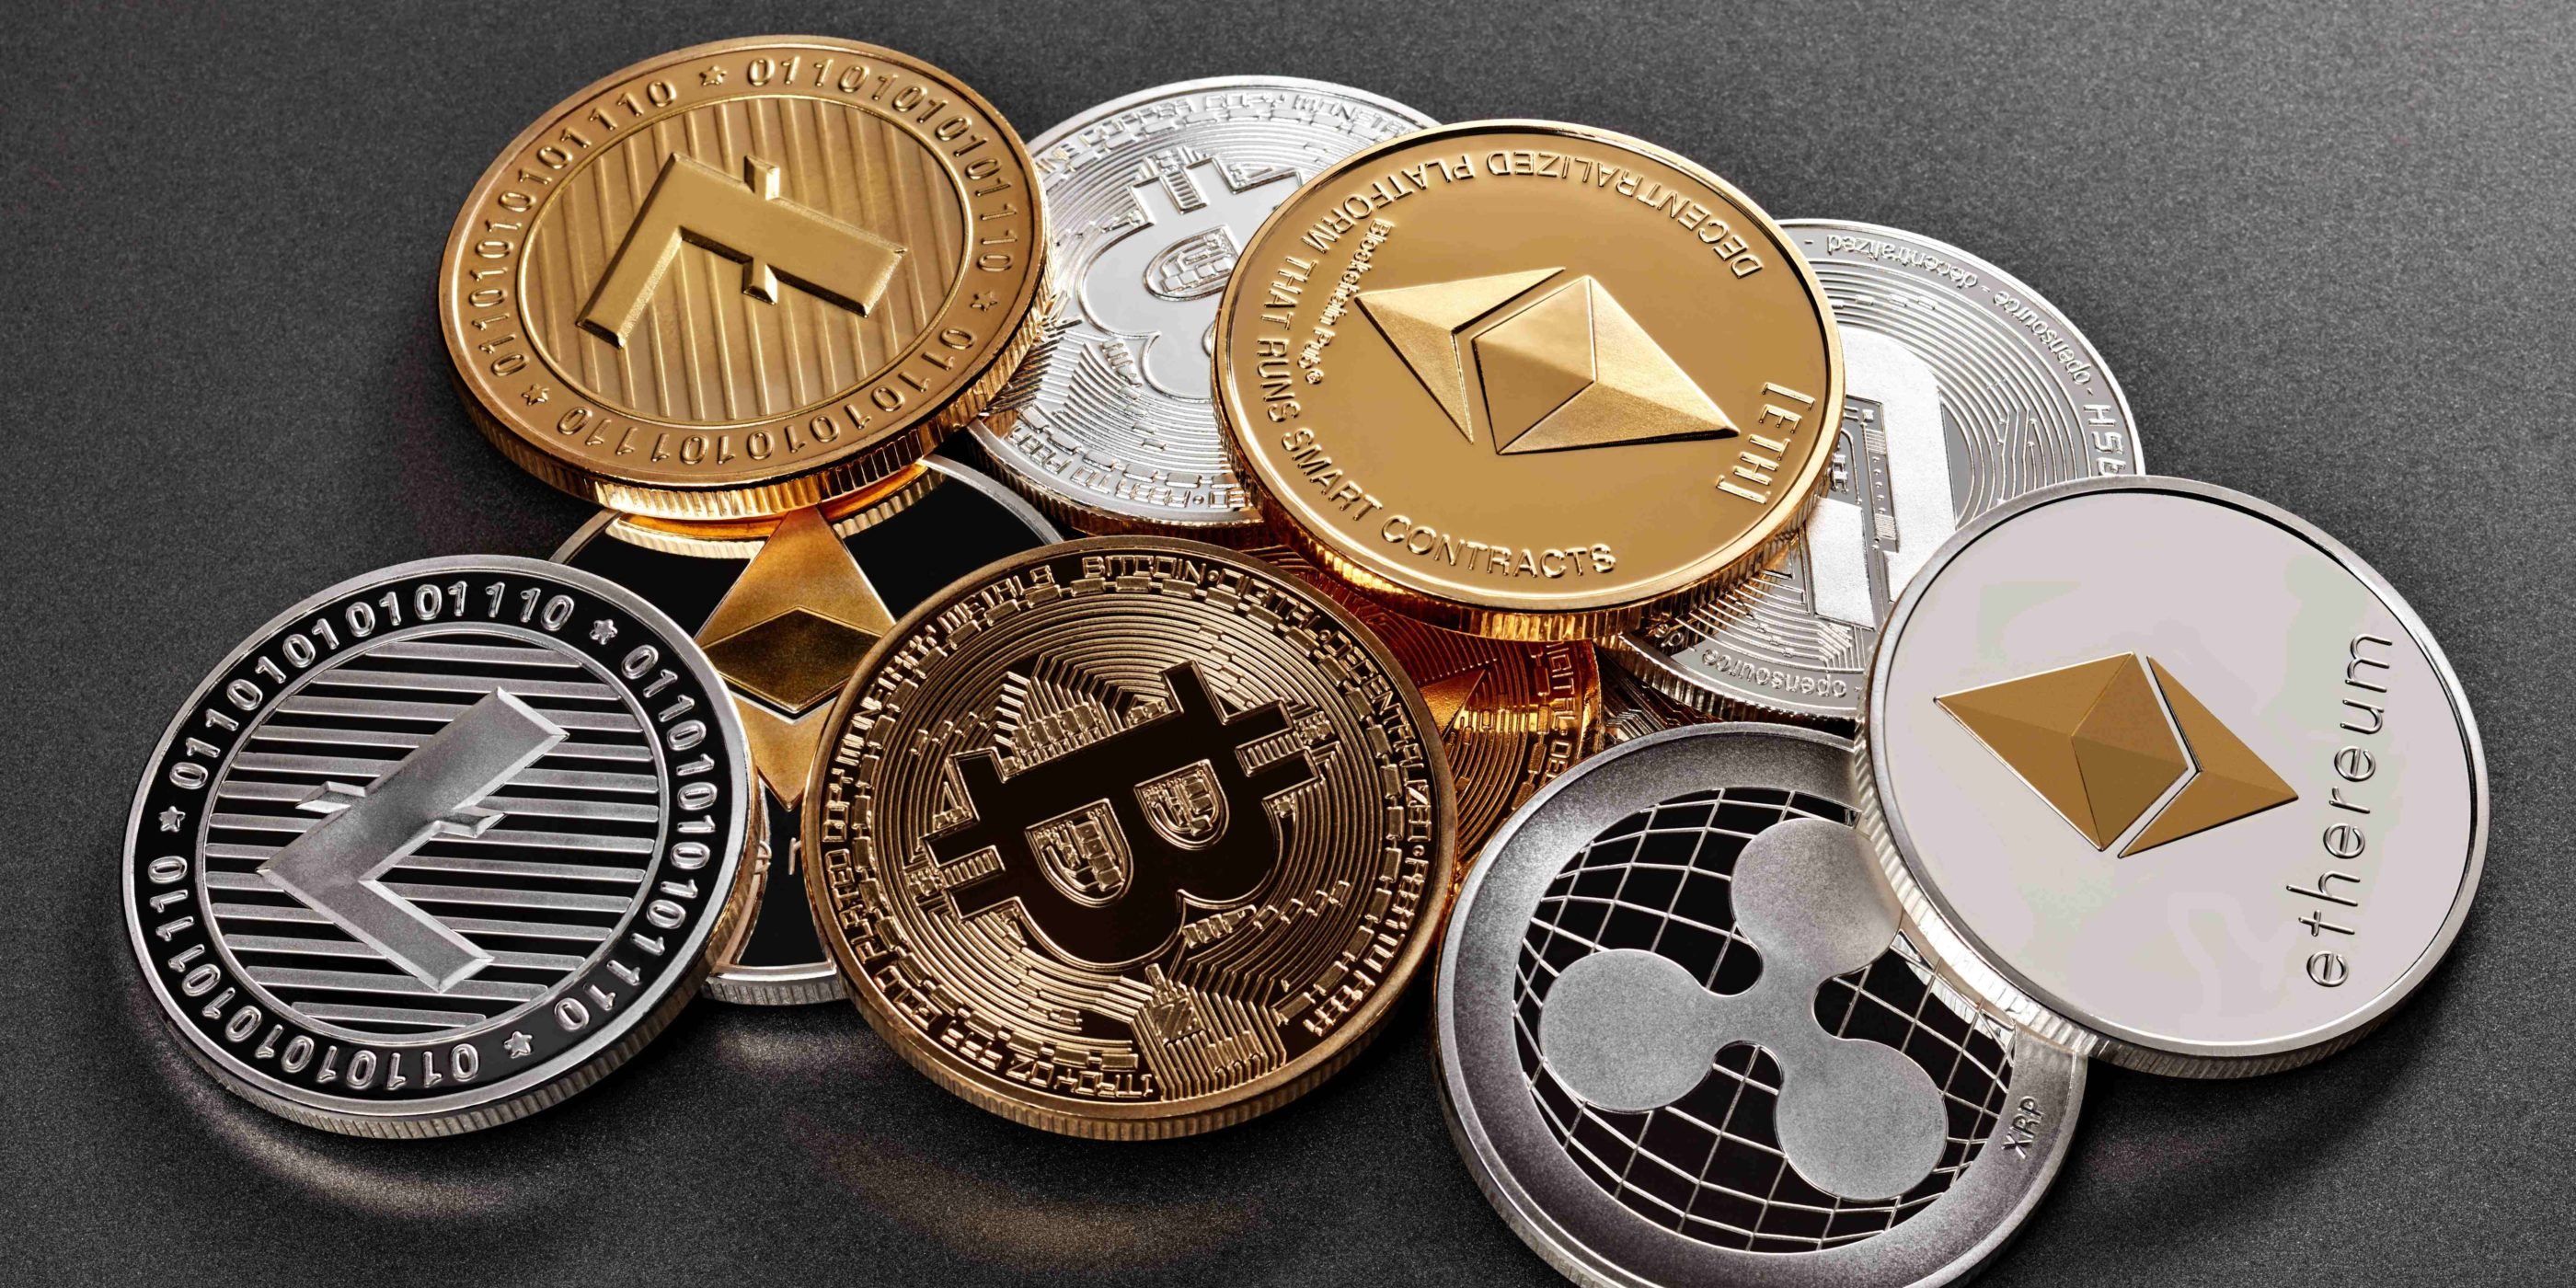 Why are there so many cryptocurrencies